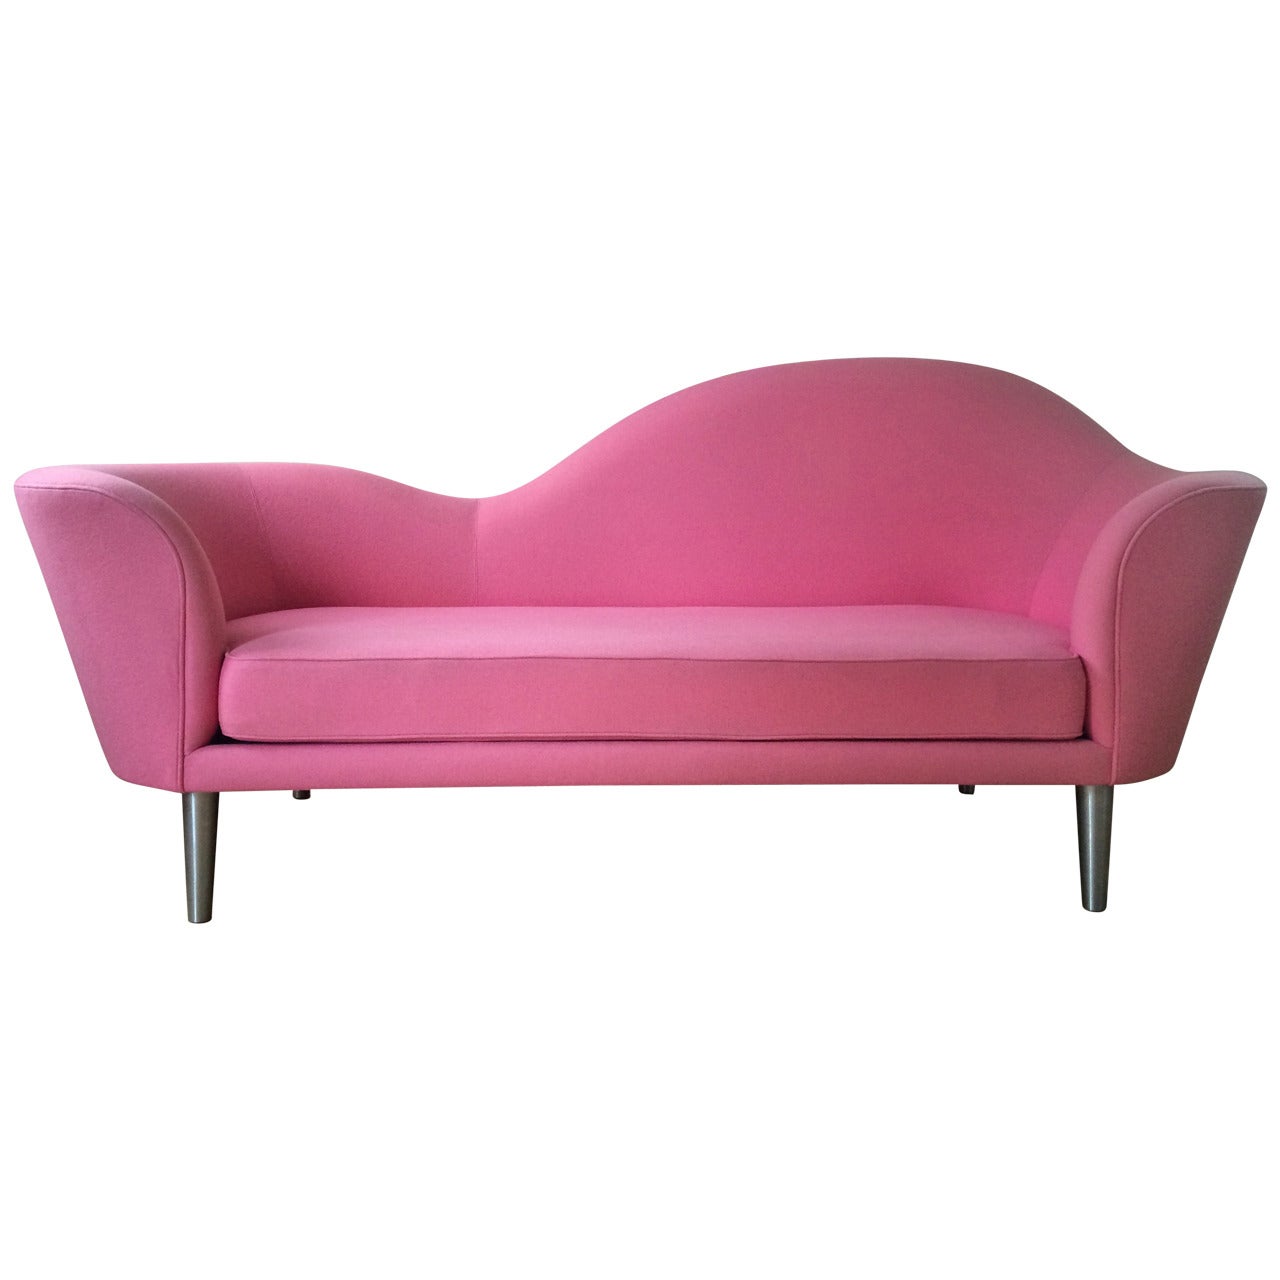 First Edition 'Grand Piano' Sofa by Gubi Olsen